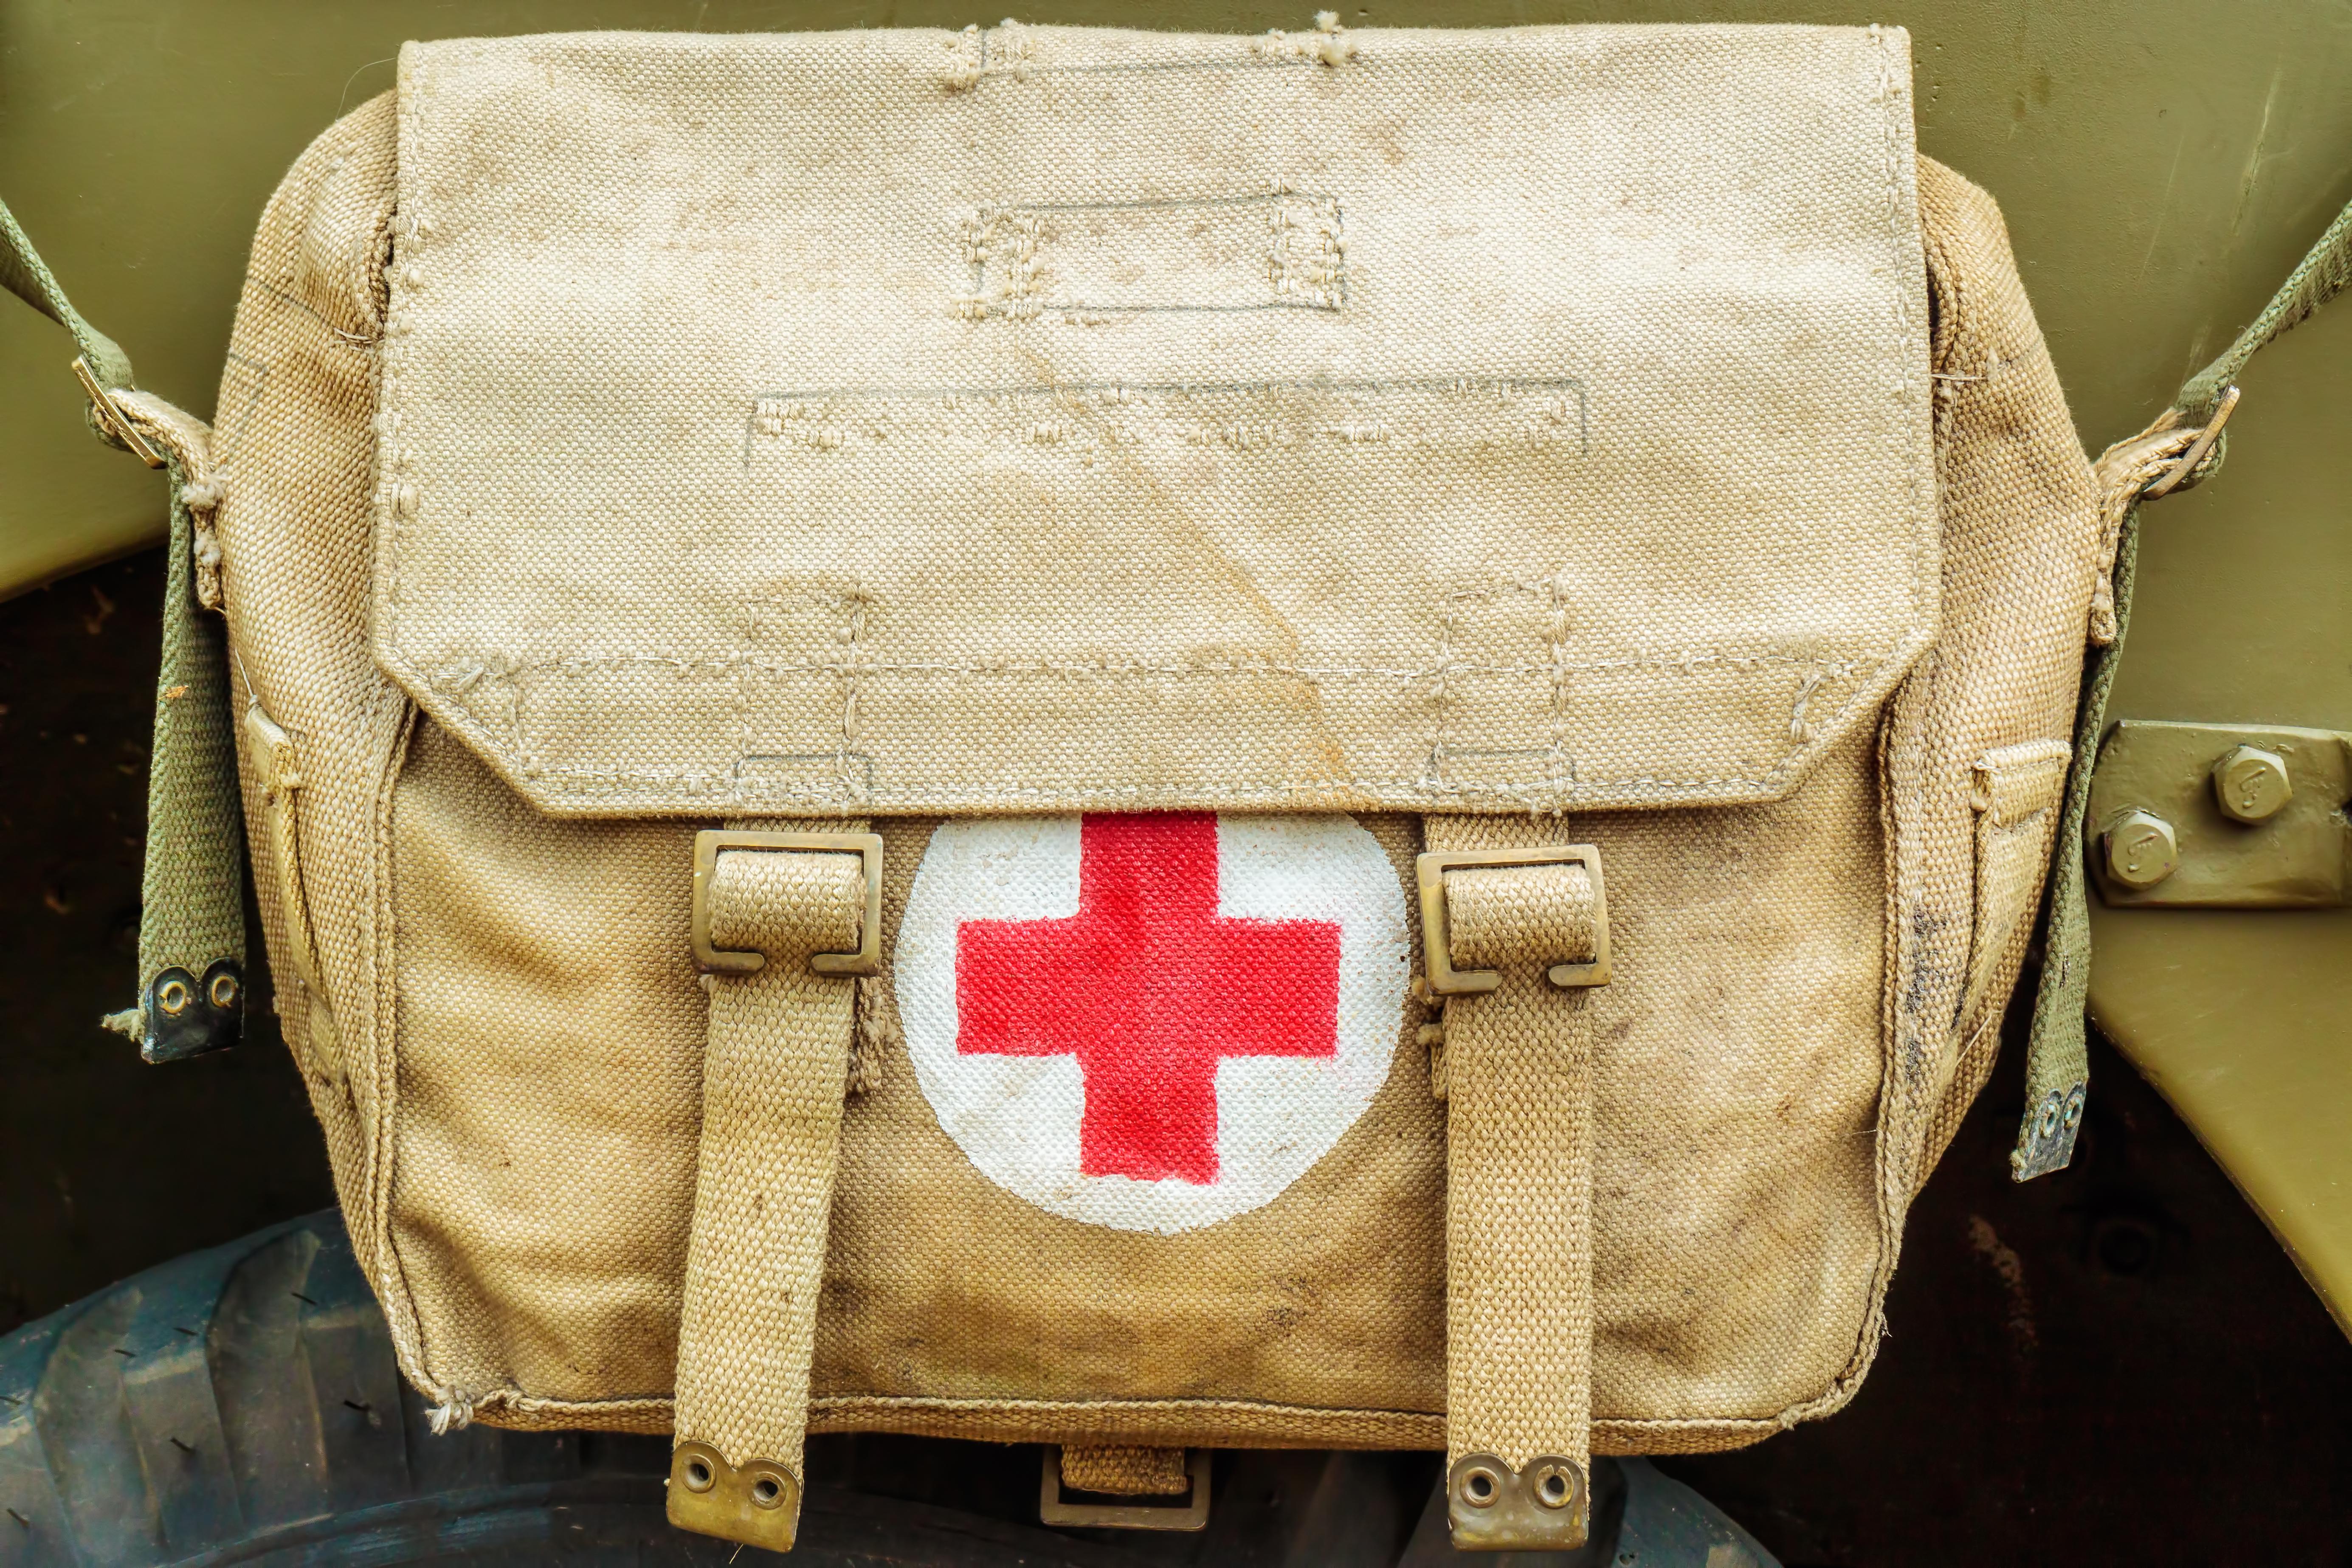 Medical bag with red cross on it